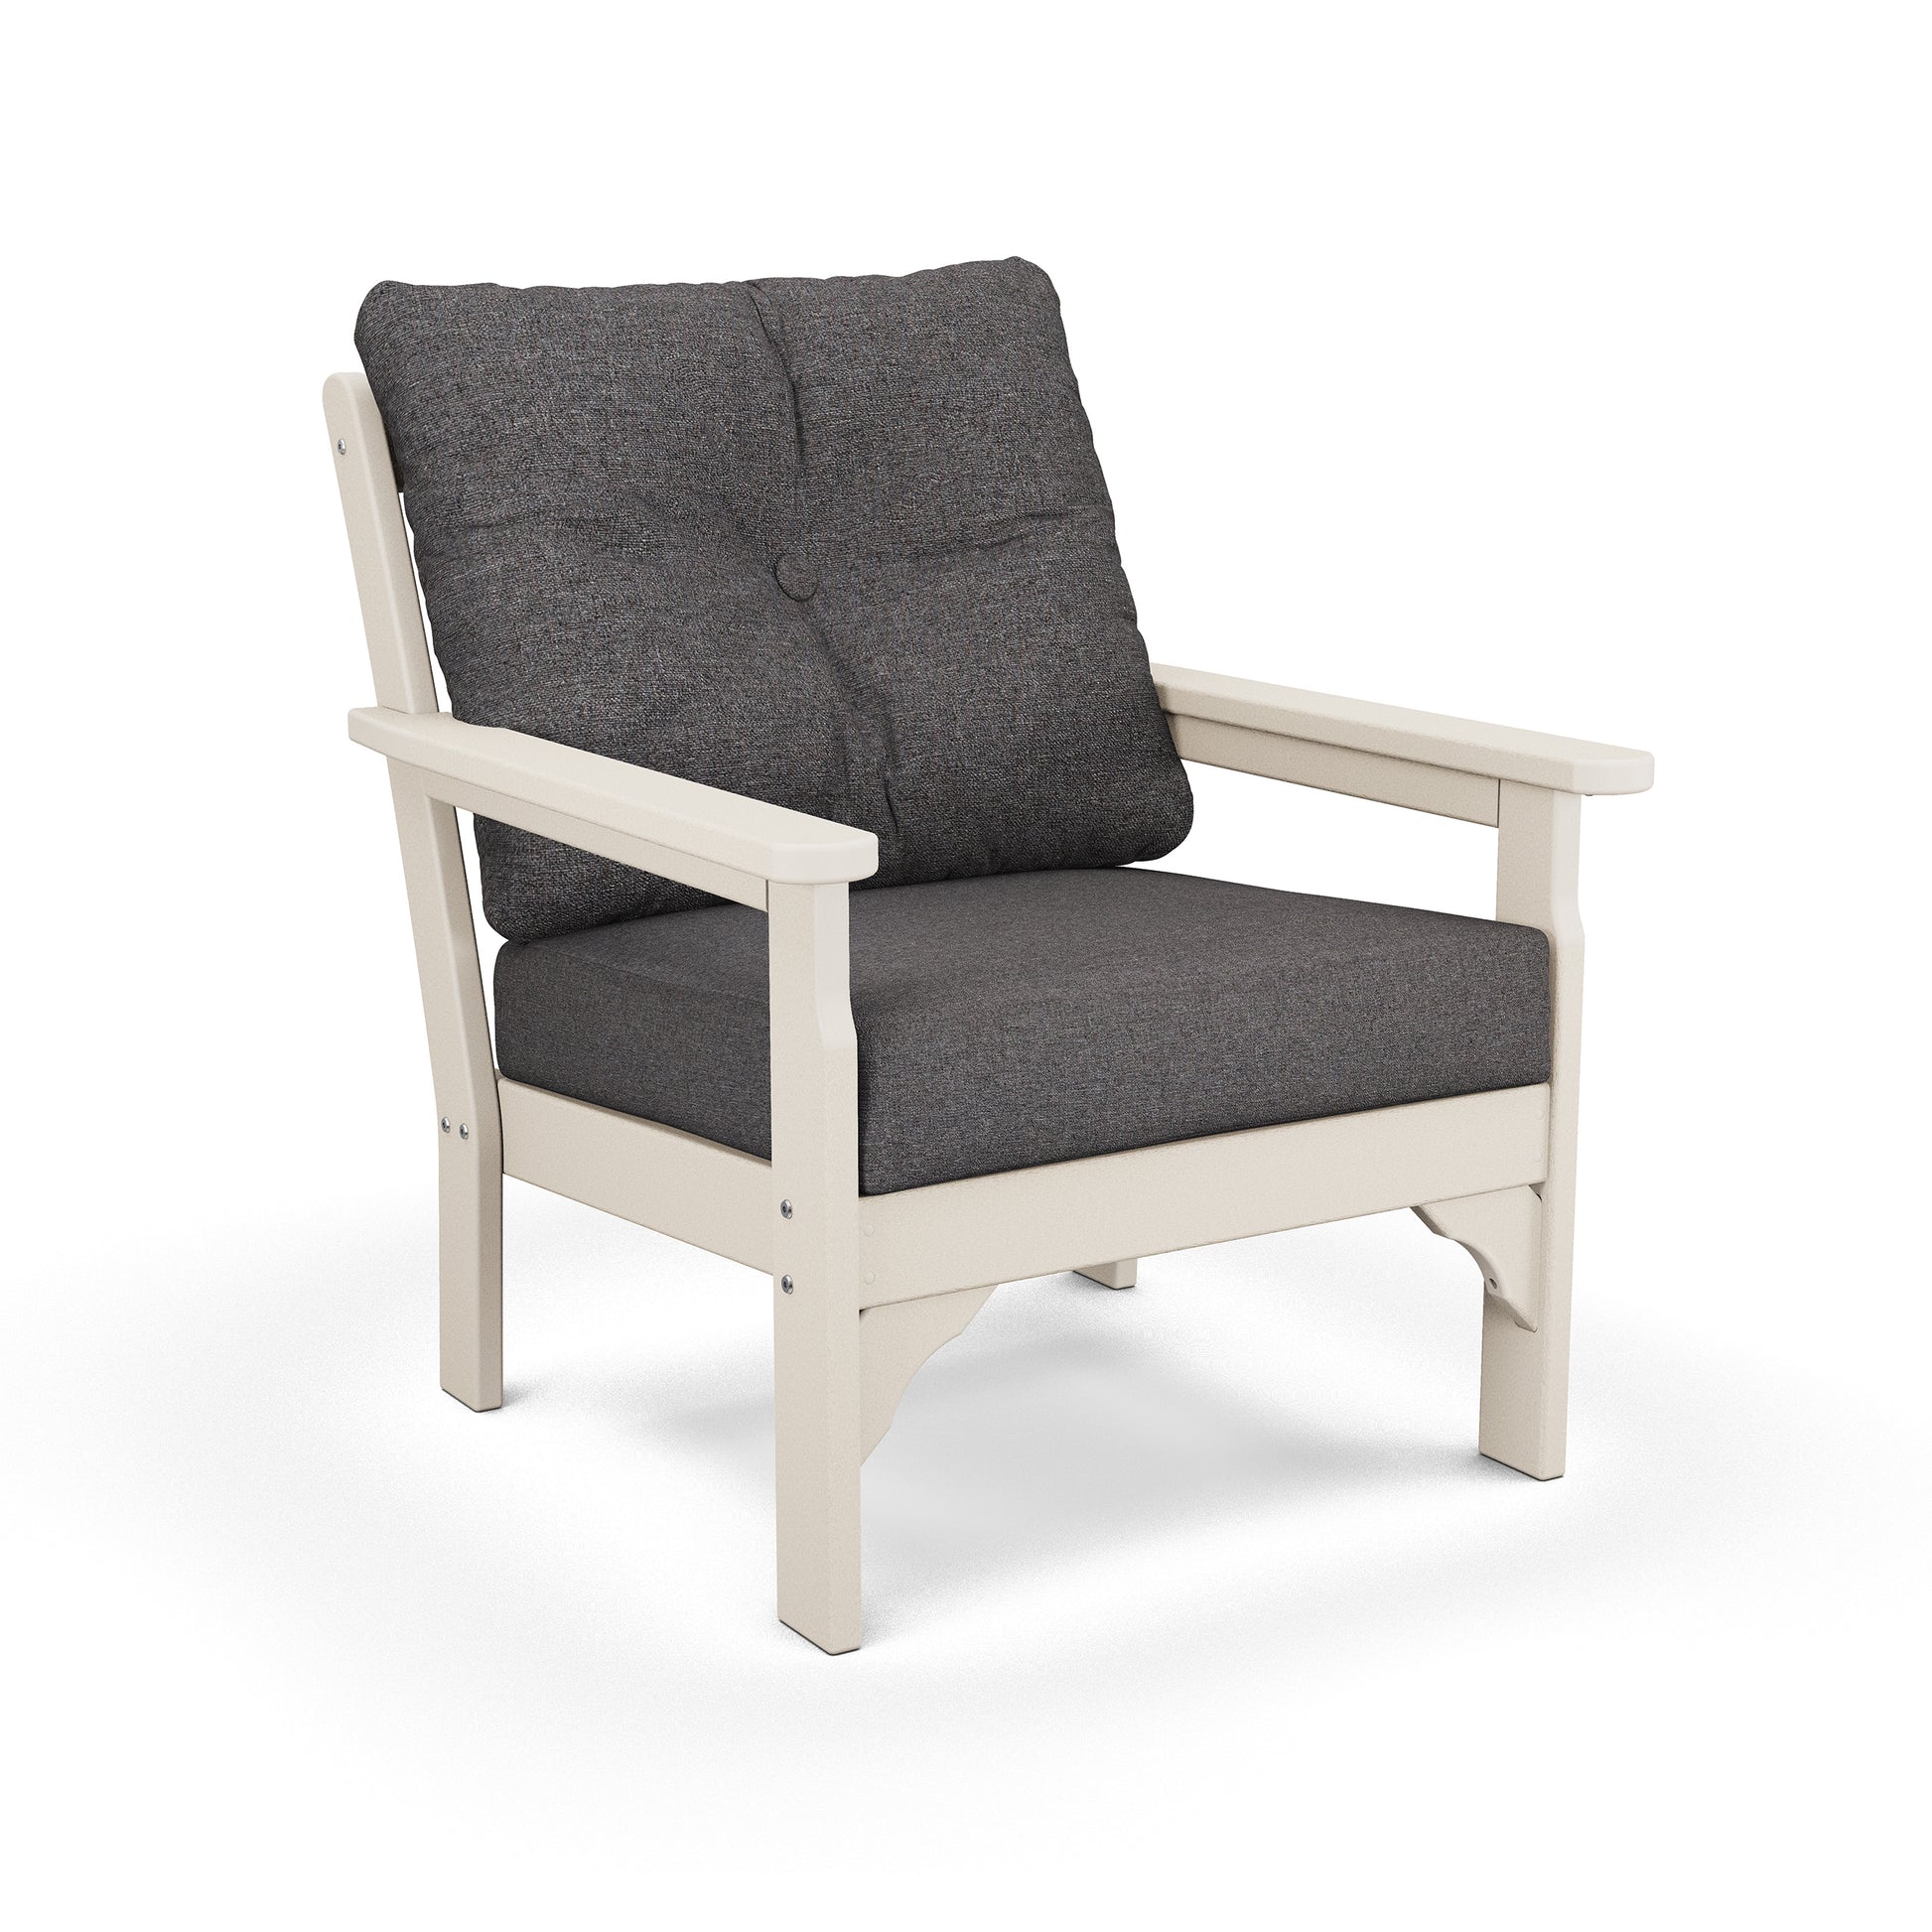 A modern armchair with a white frame and all-weather fabric cushion, isolated on a white background. The POLYWOOD Vineyard Deep Seating Chair features clean lines and a minimalist design suitable for contemporary interiors.